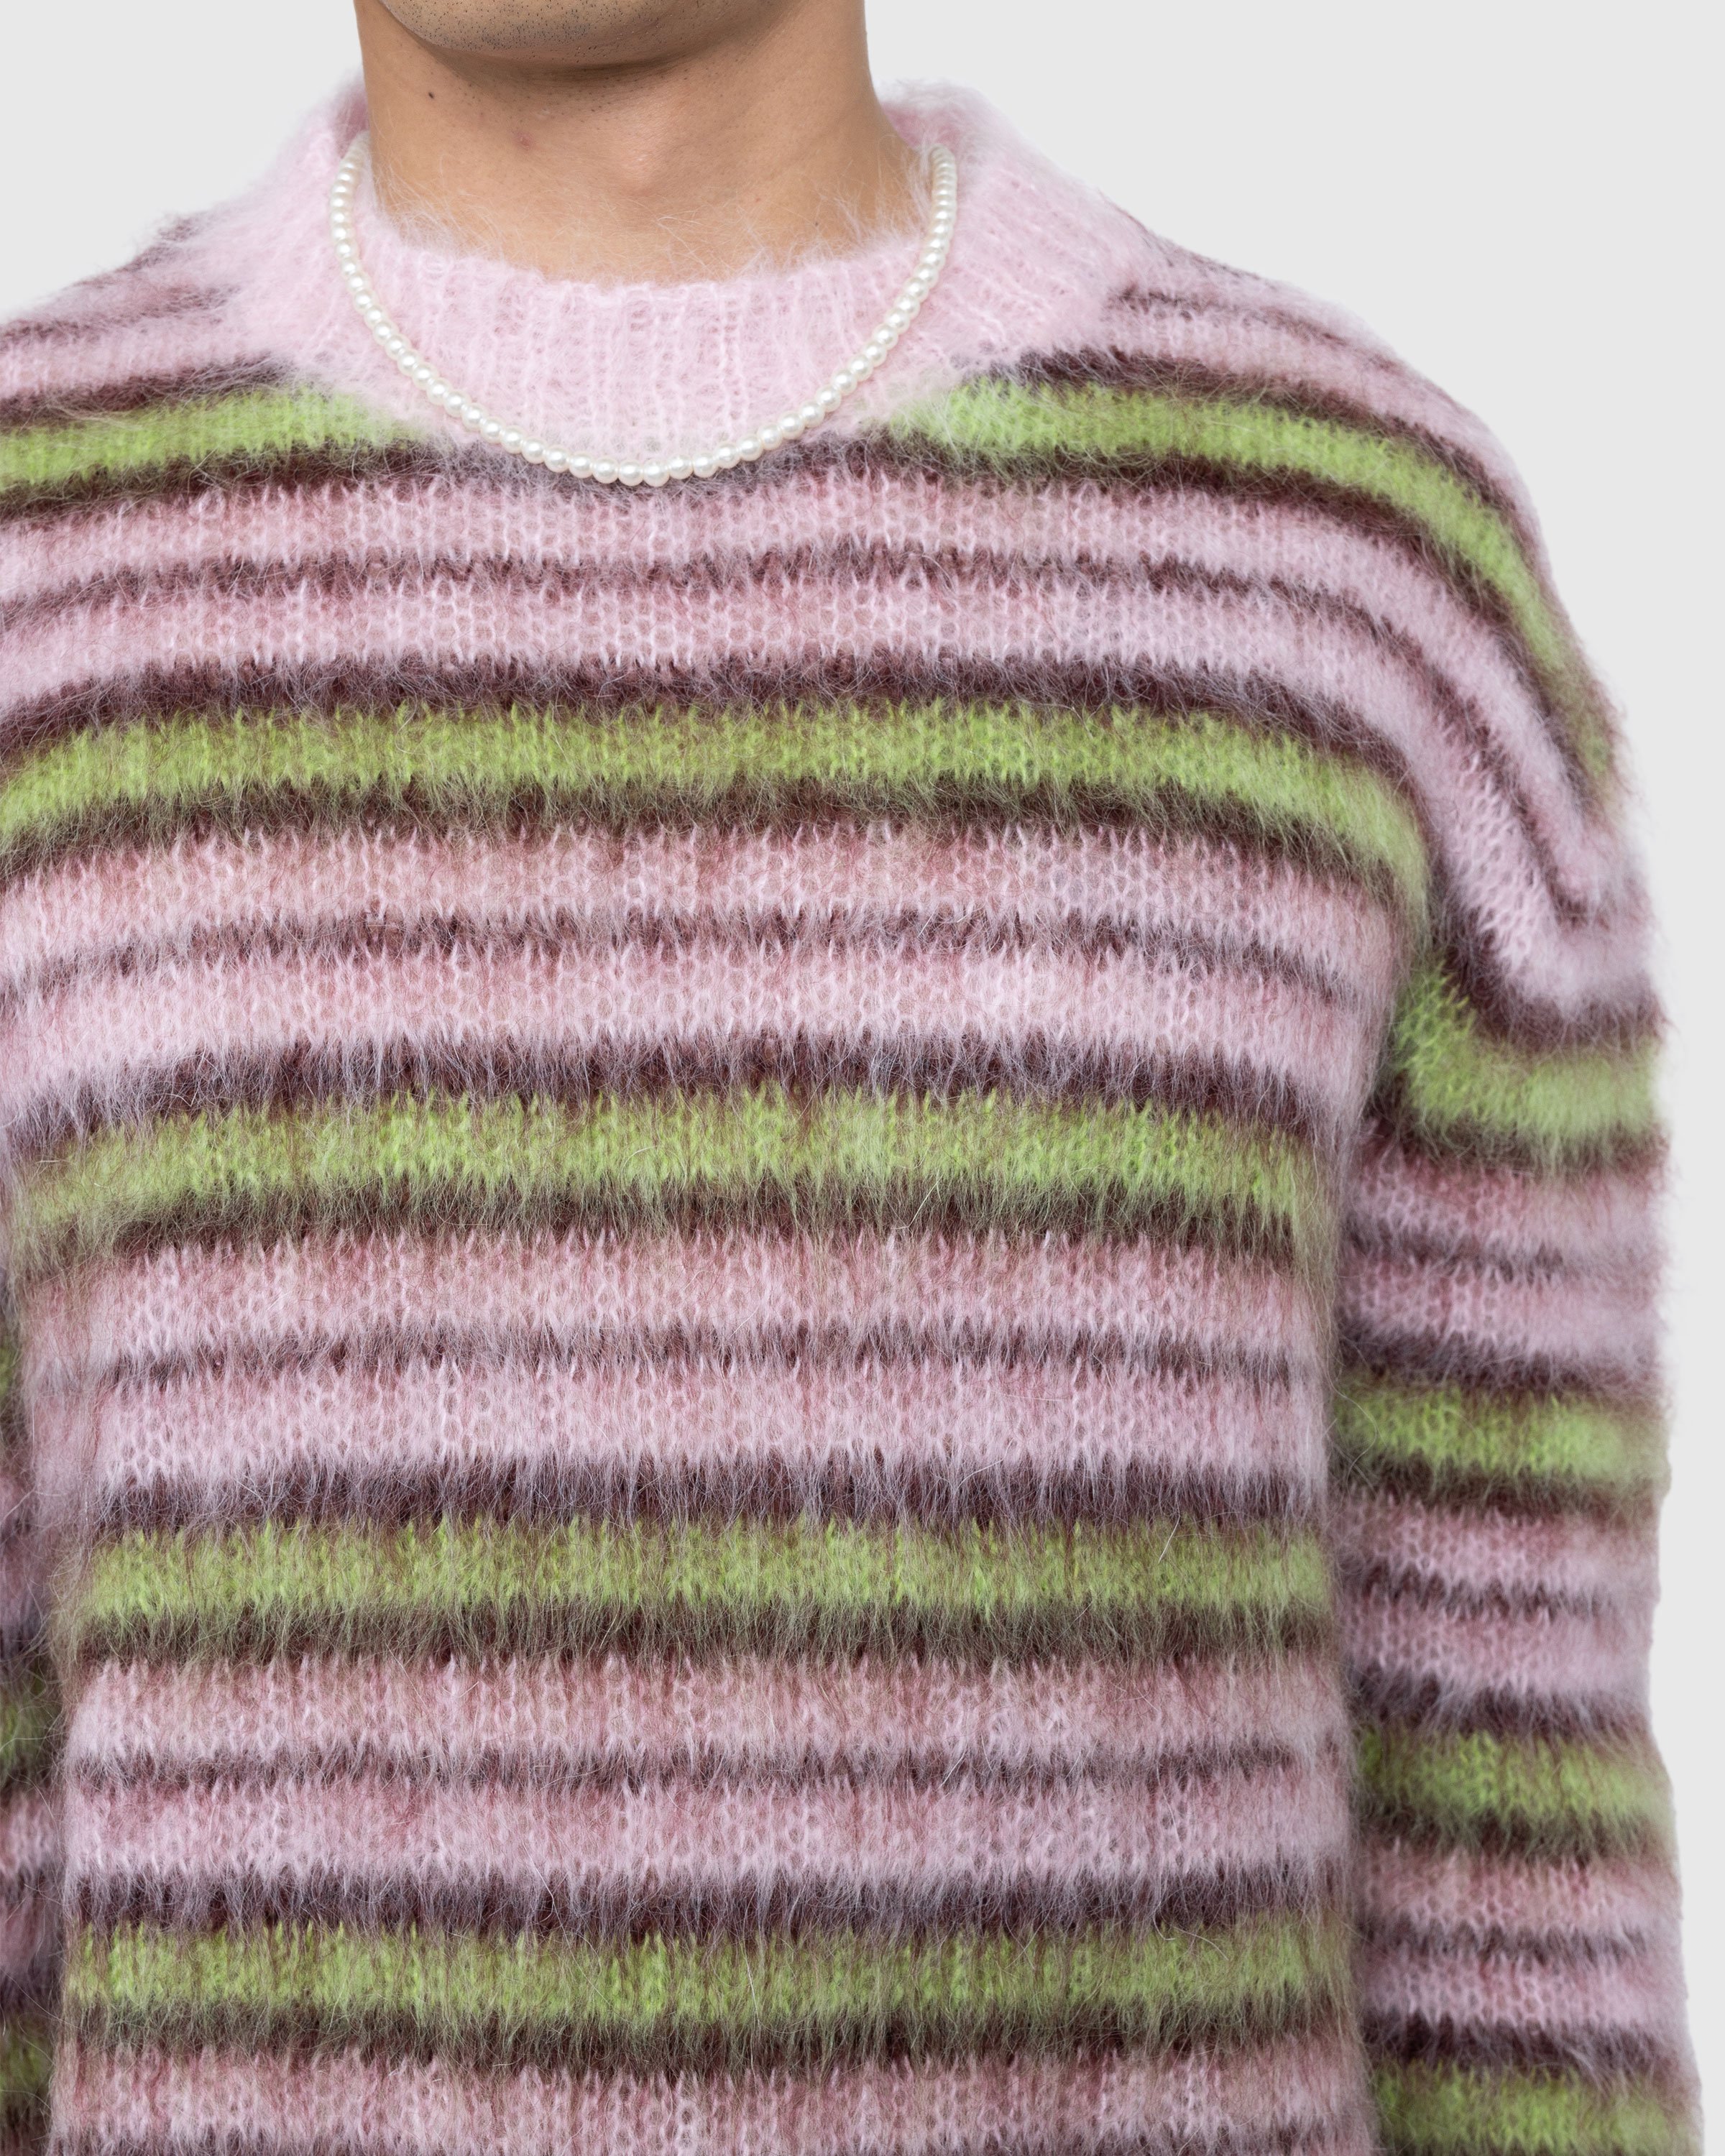 Marni - Striped Mohair Sweater Multi - Clothing - Pink - Image 4